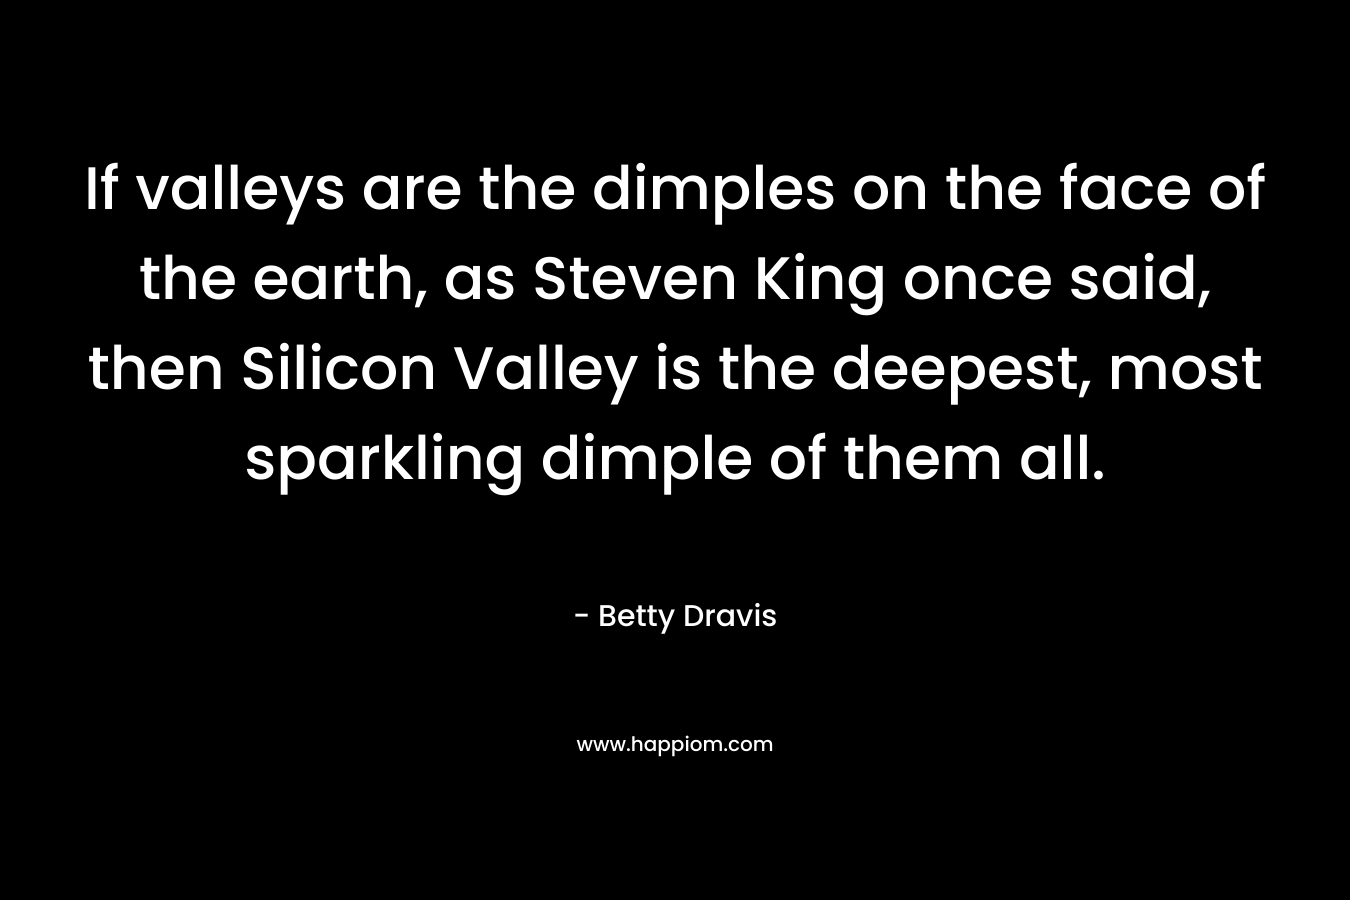 If valleys are the dimples on the face of the earth, as Steven King once said, then Silicon Valley is the deepest, most sparkling dimple of them all. – Betty Dravis